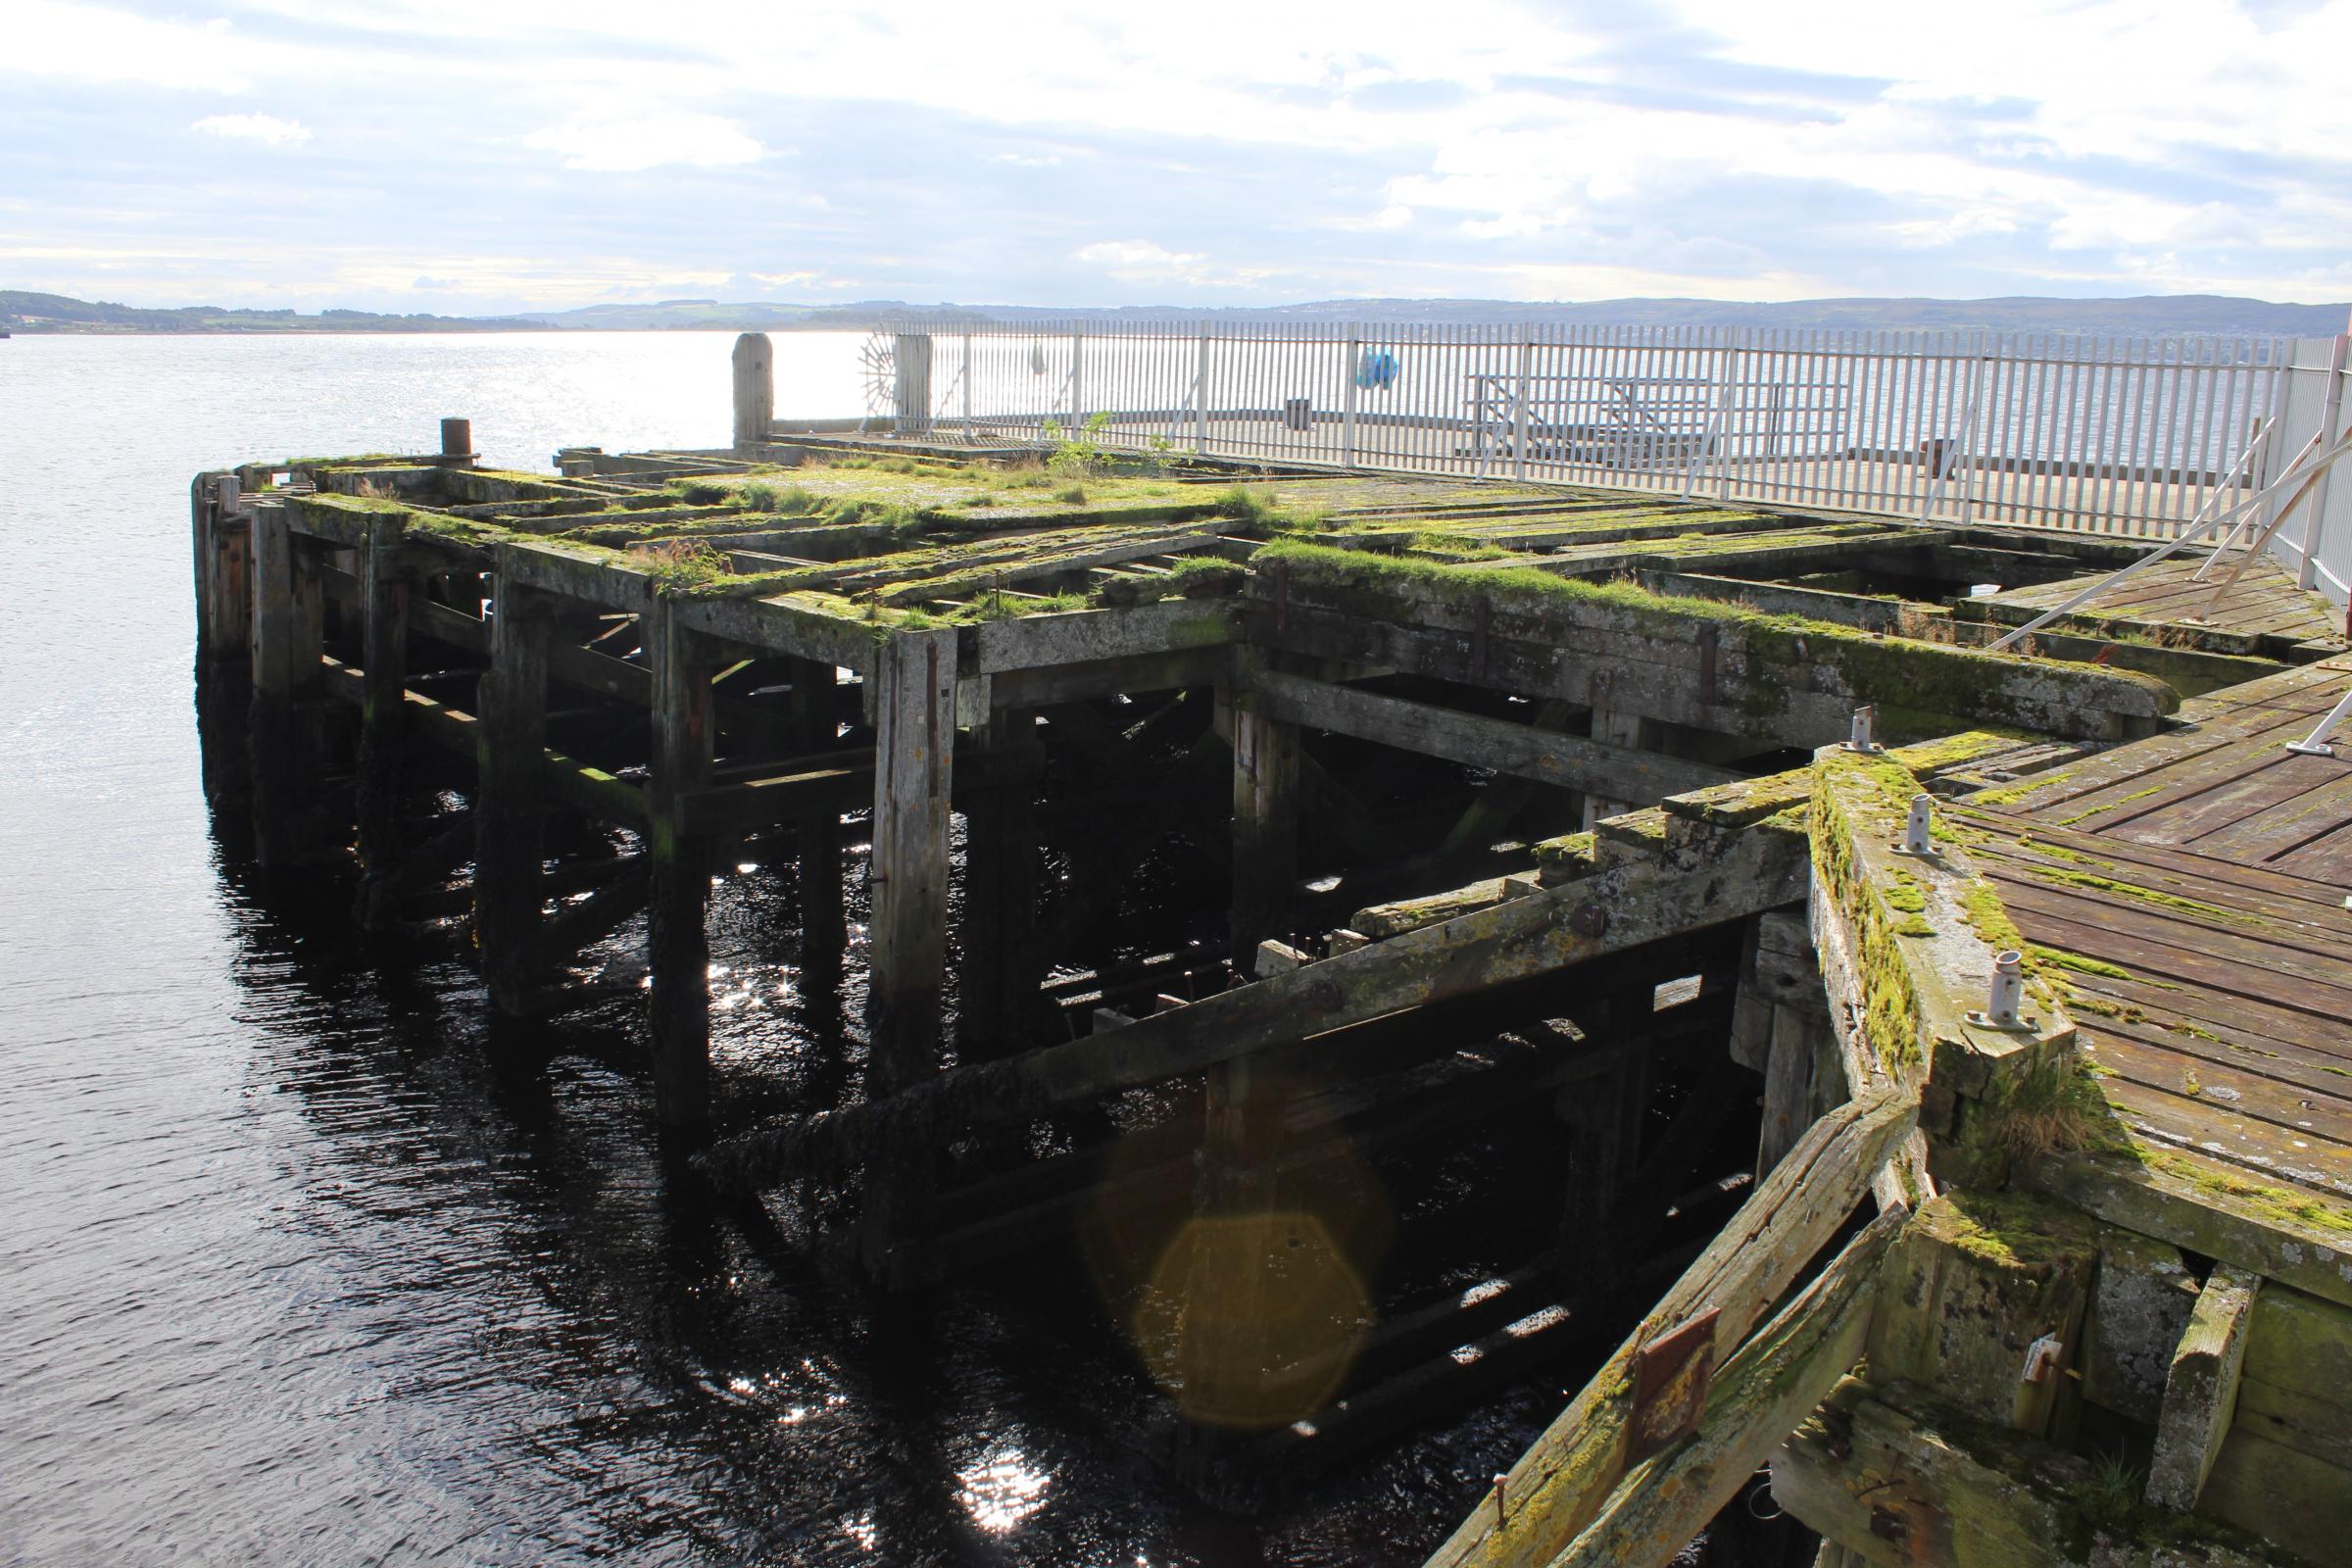 The wooden section of Helensburghs pier is rapidly deteriorating